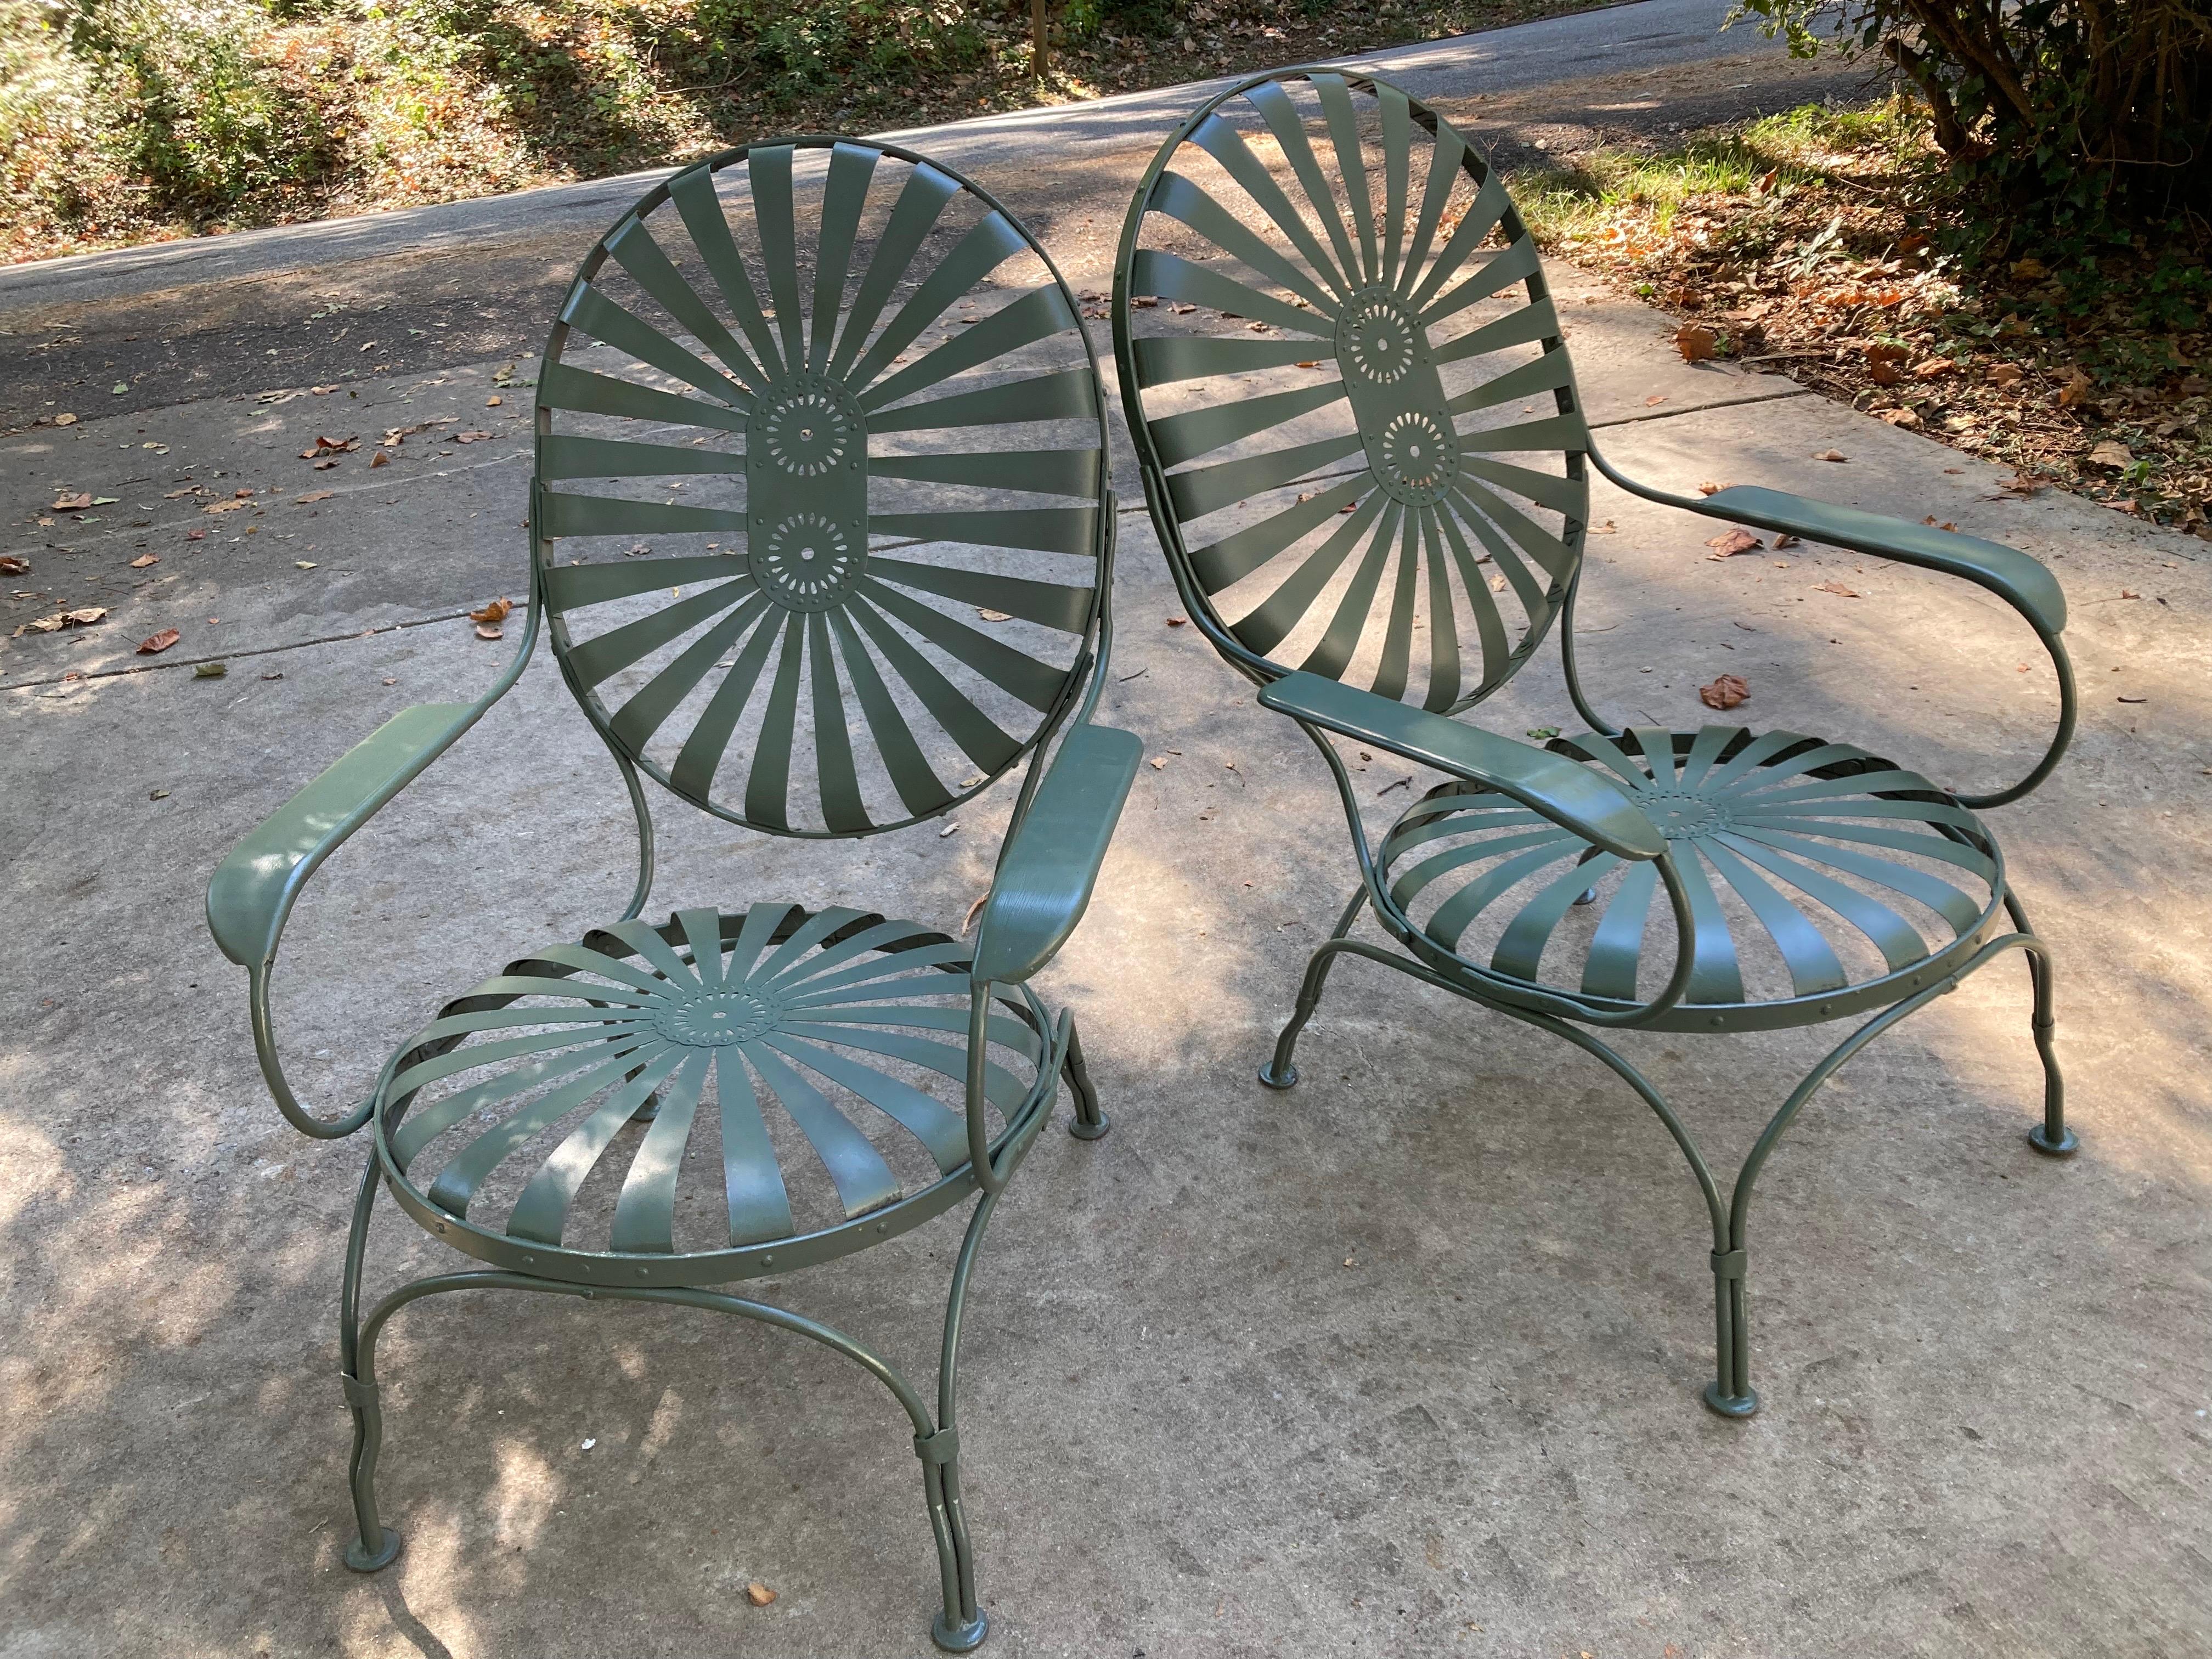 mid century duo, sandblasted and primed then painted in a satin italian olive hue  38 tall, firm sproing steel seating, sold as a pair
perfect for any patio or garden
circa 1930
shipping from ahens, ga